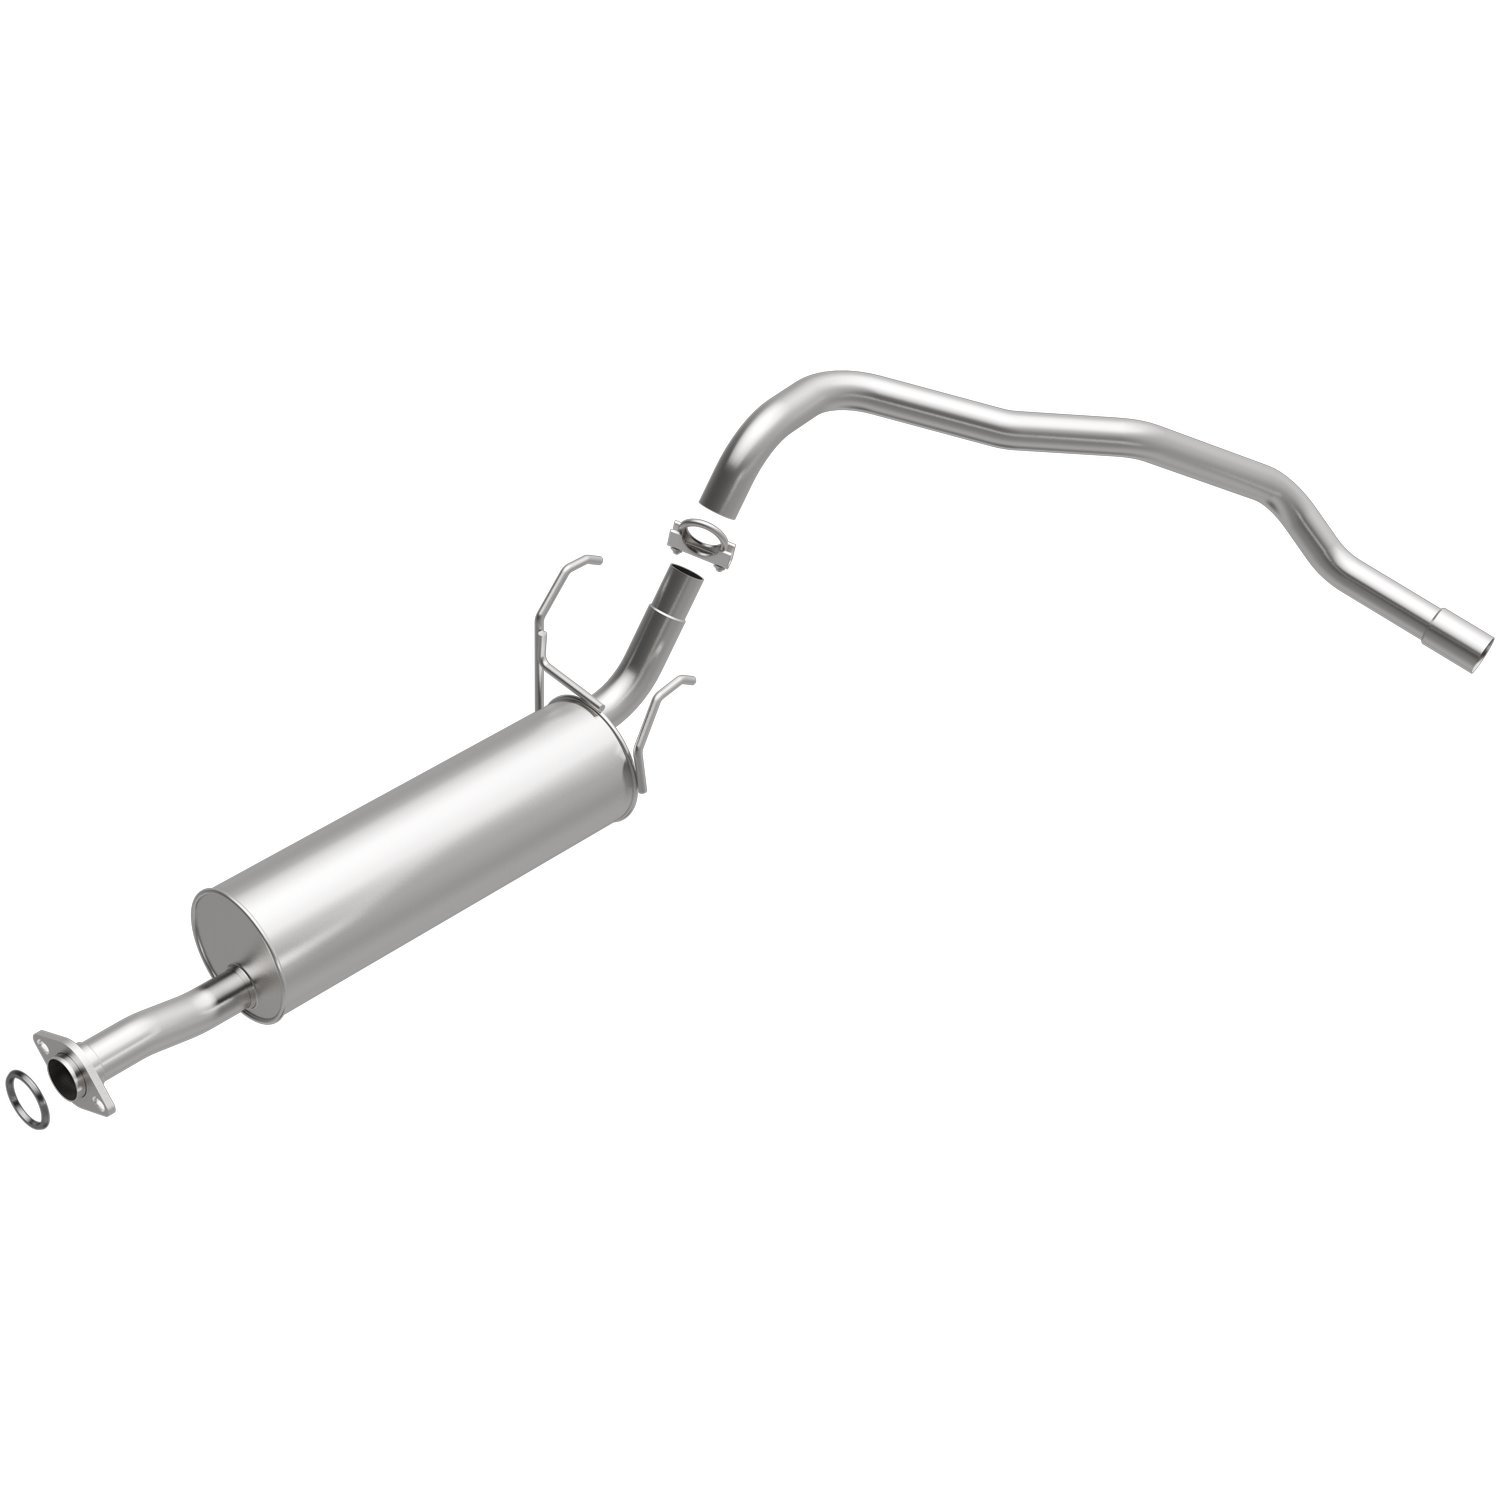 Direct-Fit Exhaust Kit, 1989-1991 Toyota 4Runner 3.0L